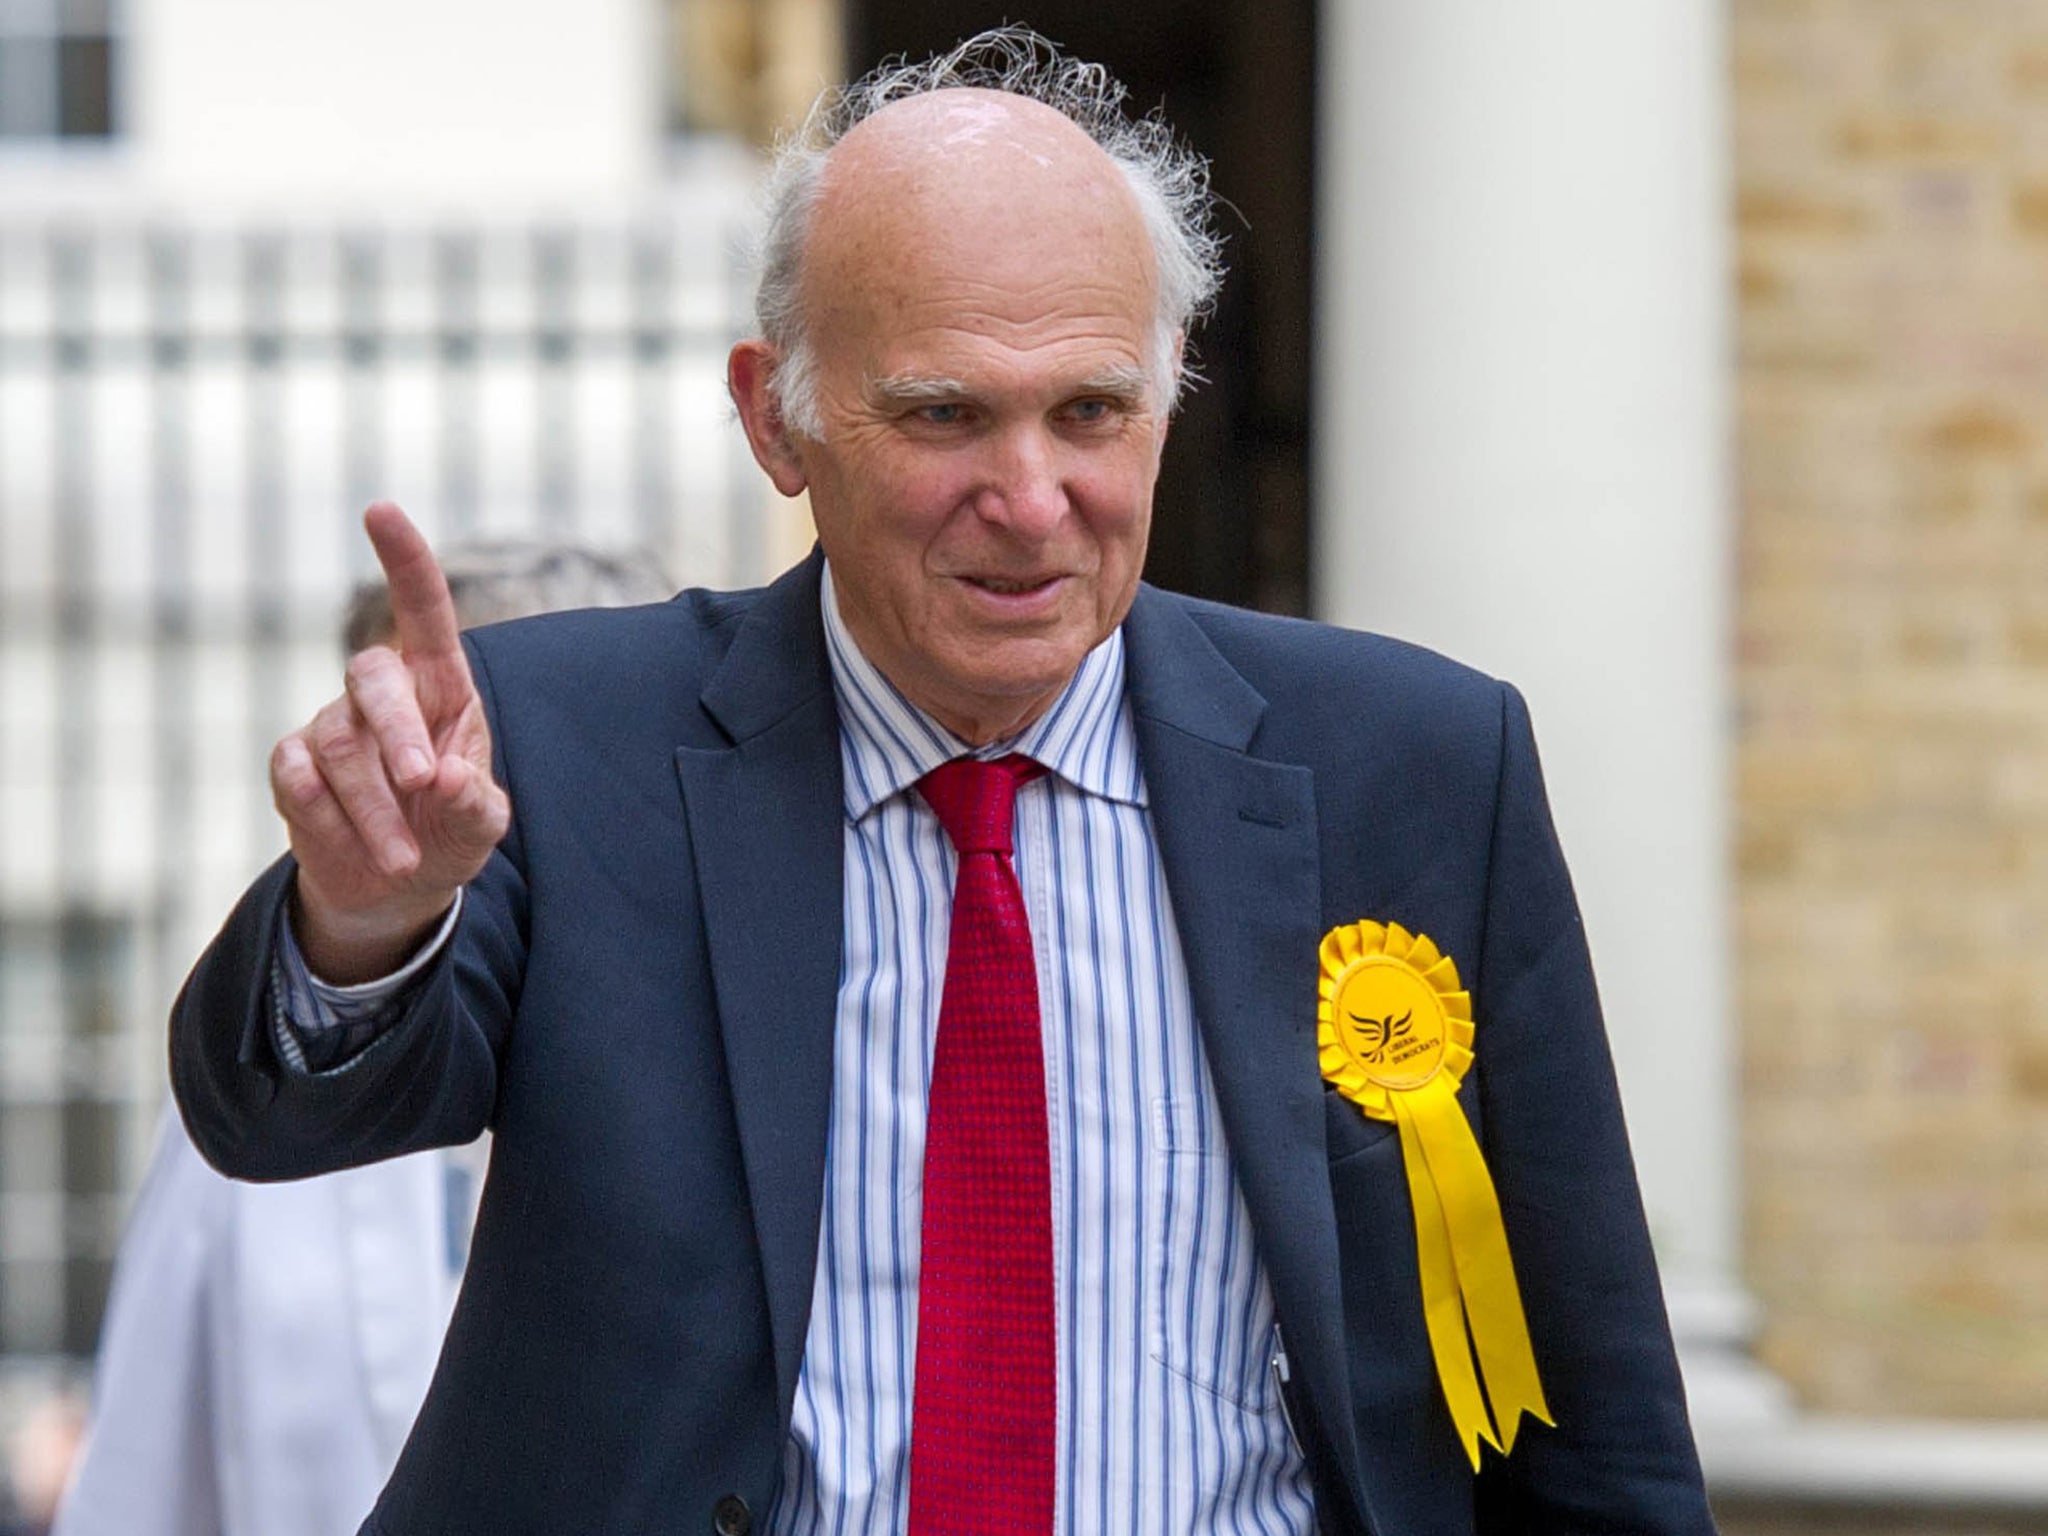 Vince Cable is the only declared contender to be the next Lib Dem leader